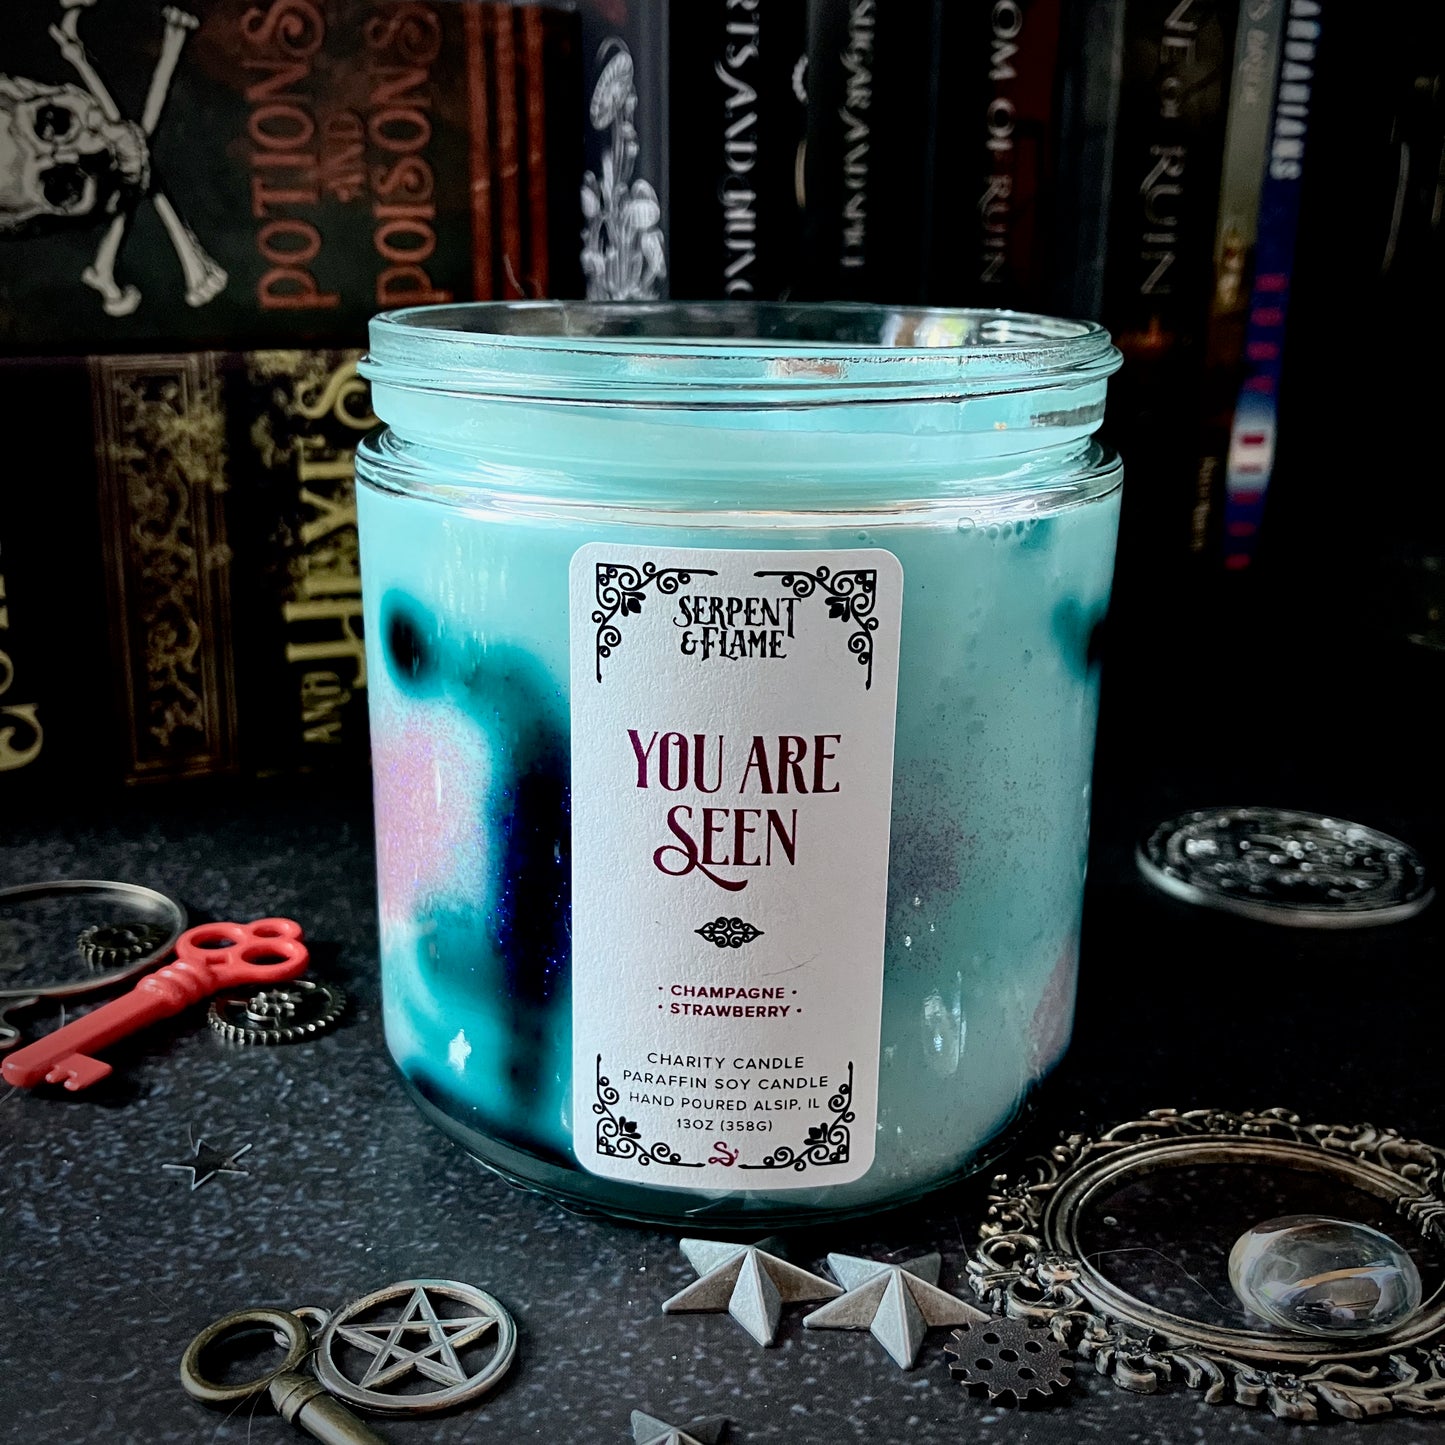 You Are Seen Charity Candle, Champagne Apple